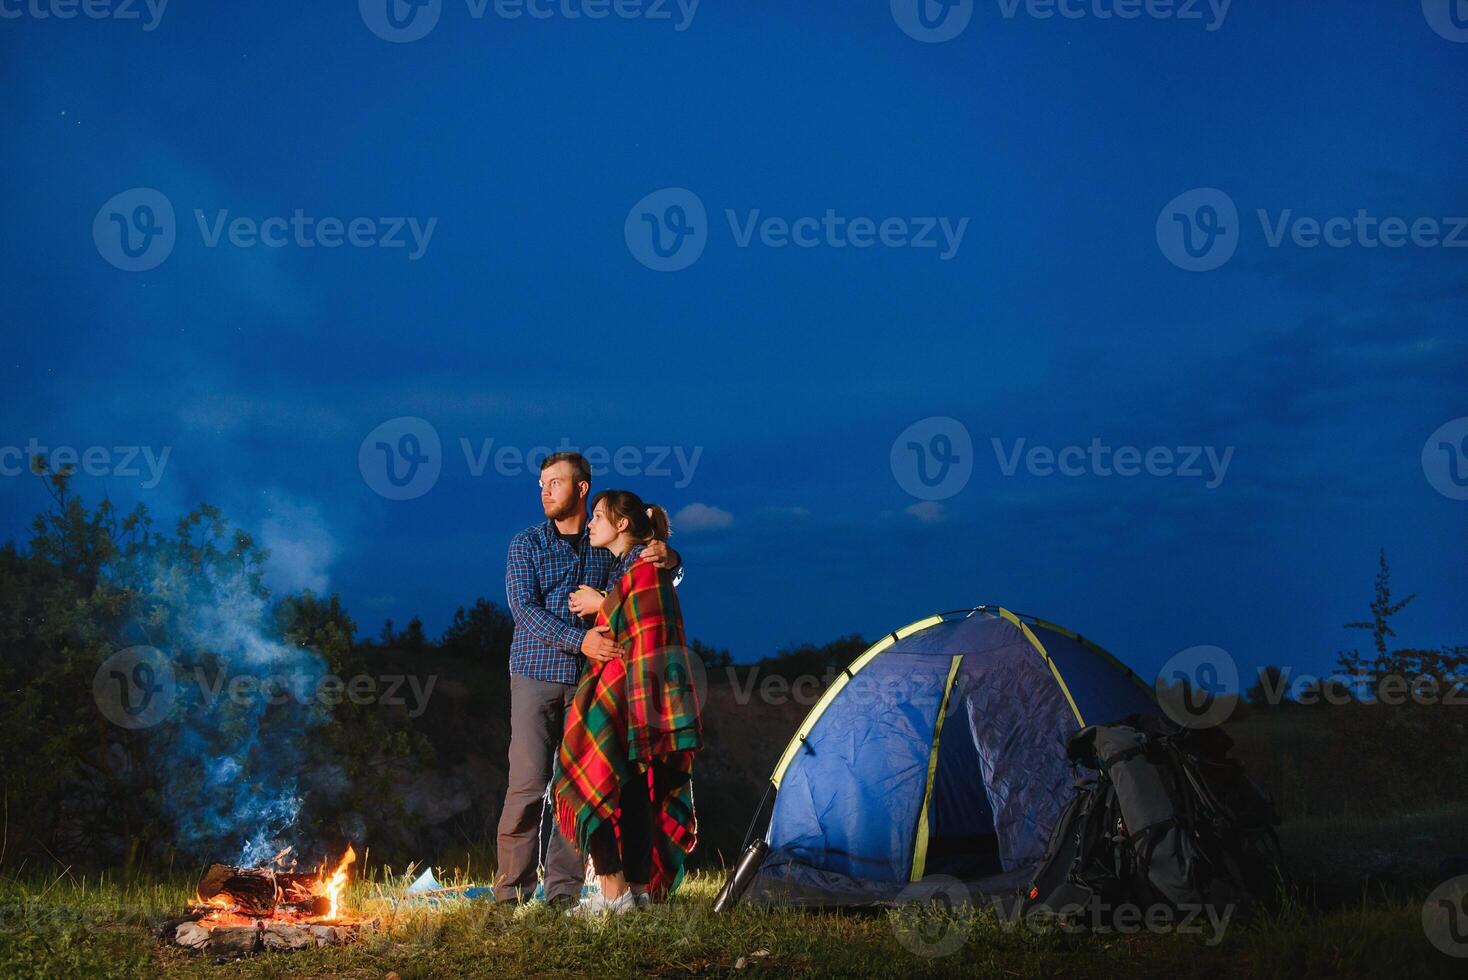 Loving couple hikers enjoying each other, standing by campfire at night under evening sky near trees and tent. Romantic camping near forest in the mountains photo